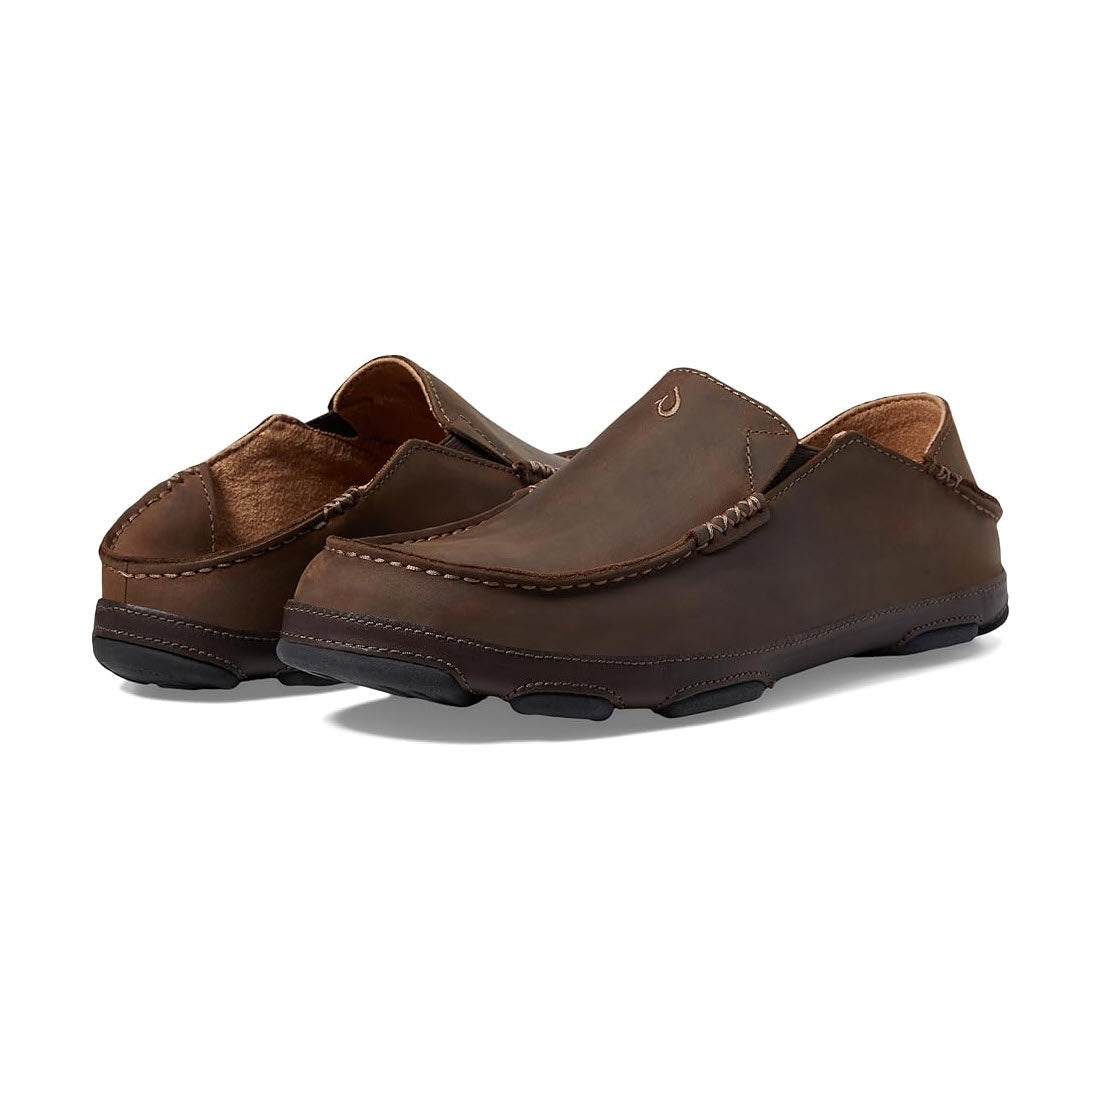 A pair of men&#39;s Olukai Moloa slip-on casual shoes crafted from water-resistant leather, presented against a white background.